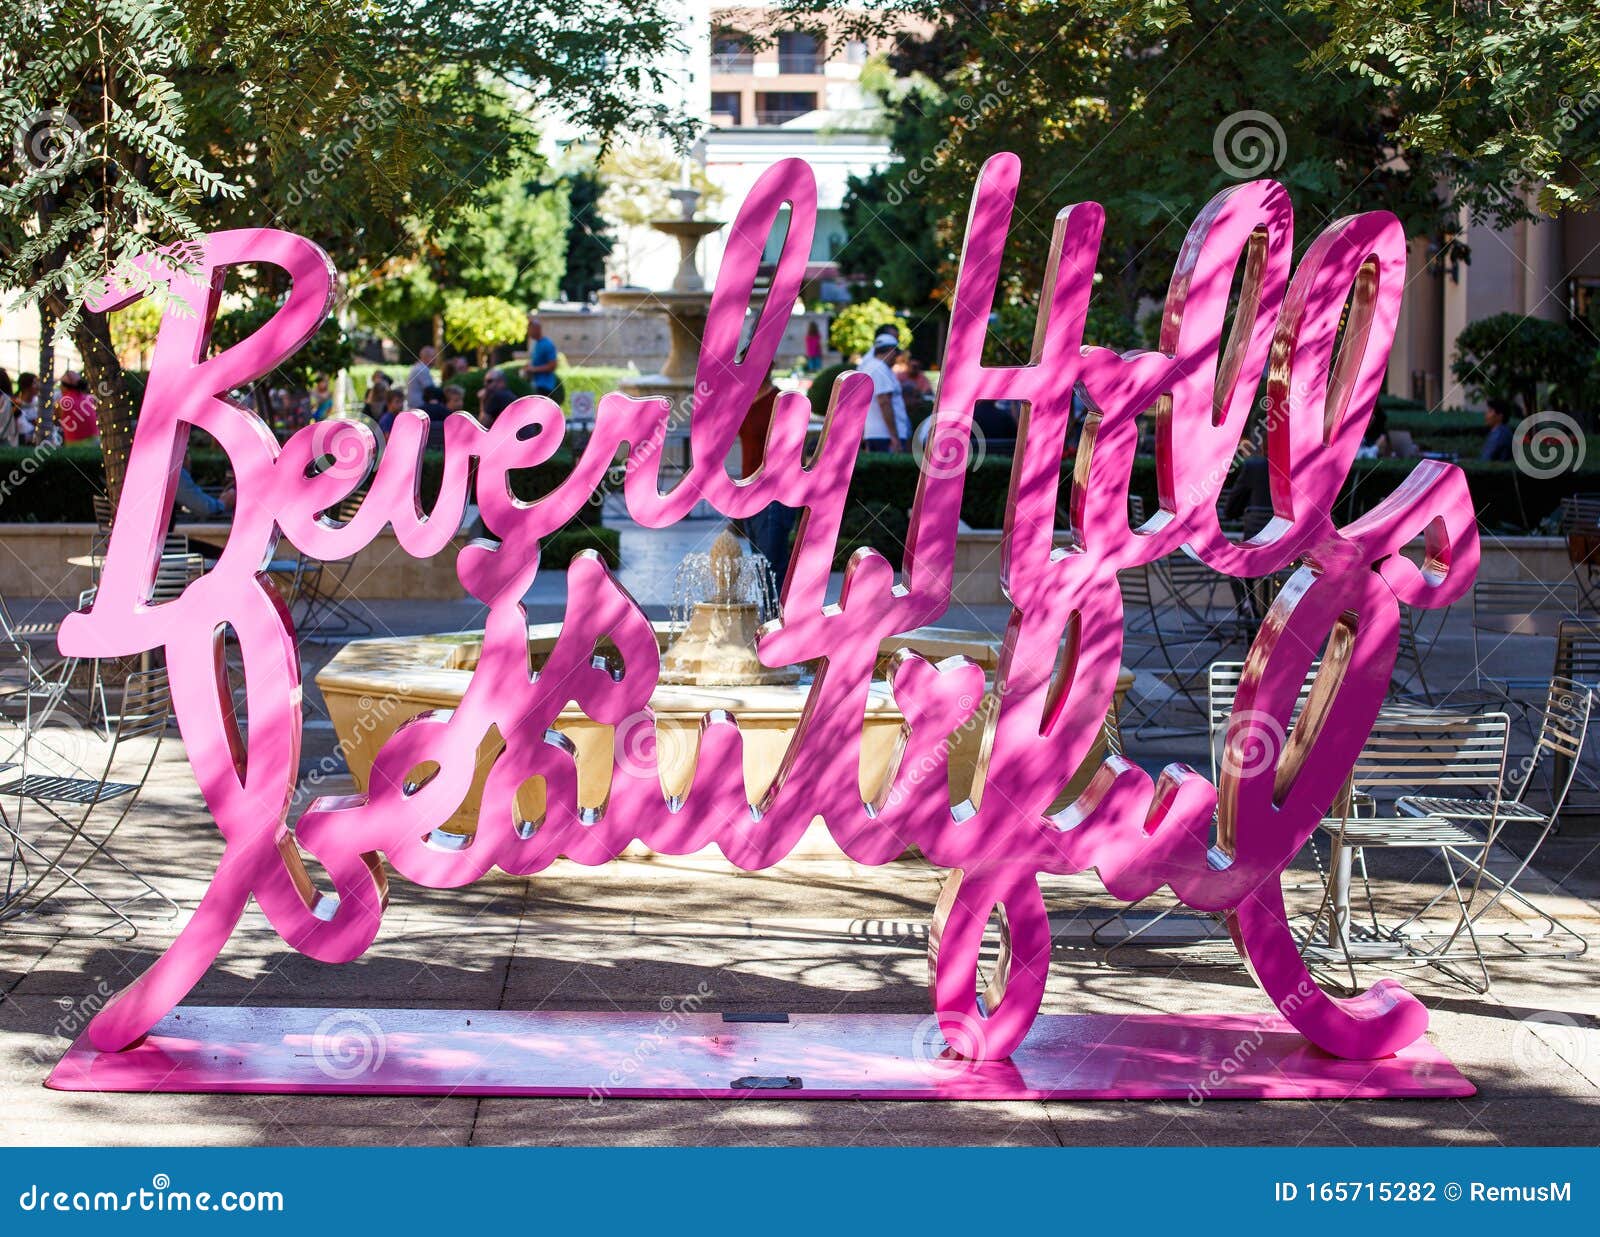 Beverly Hills Beautiful, Painted in Pink. Editorial Photography - Image